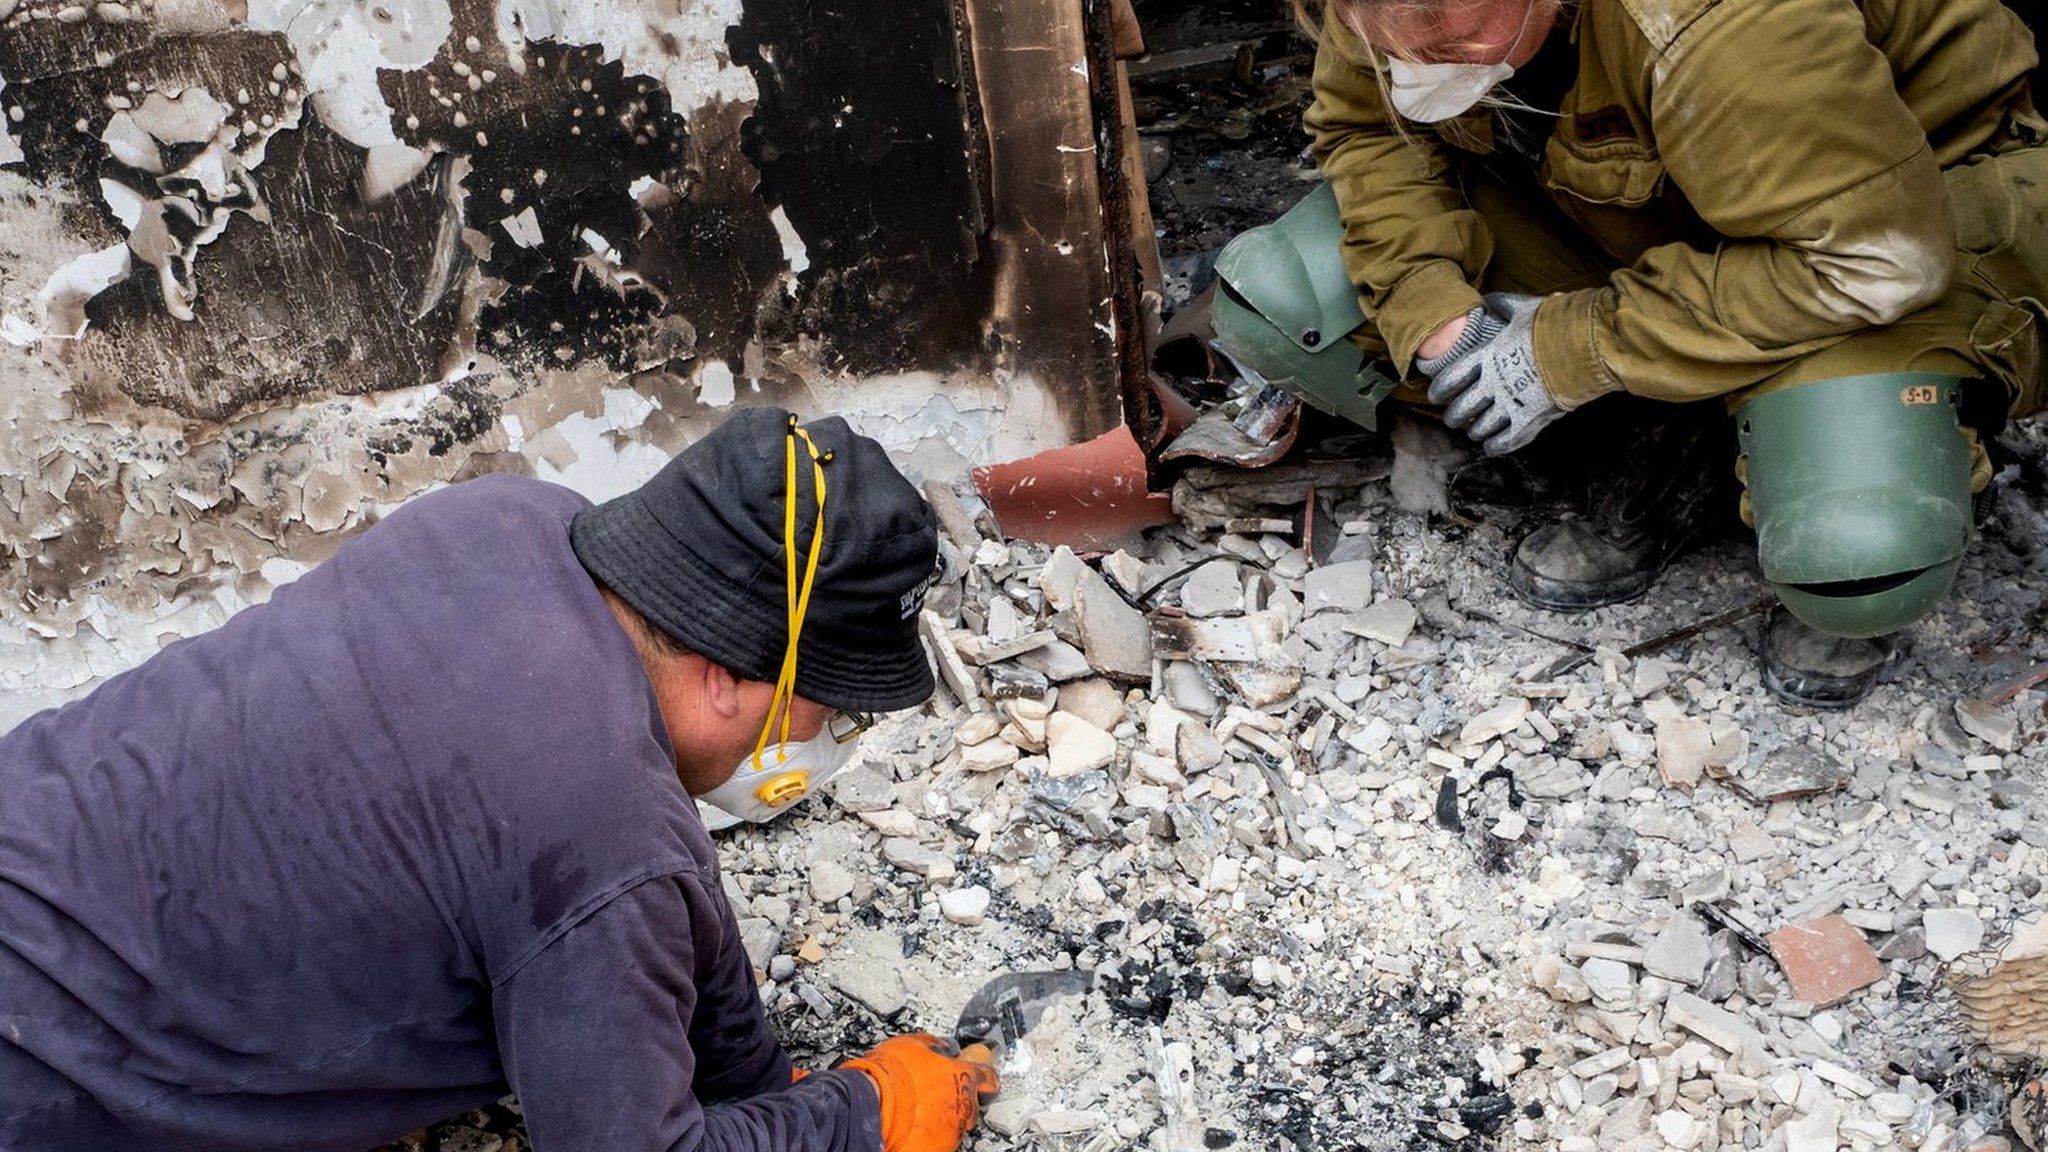 An Israeli archaeologist and two soldiers inspect charred debris on the floor of a house in southern Israel that was set on fire during Hamas's attack on 7 October